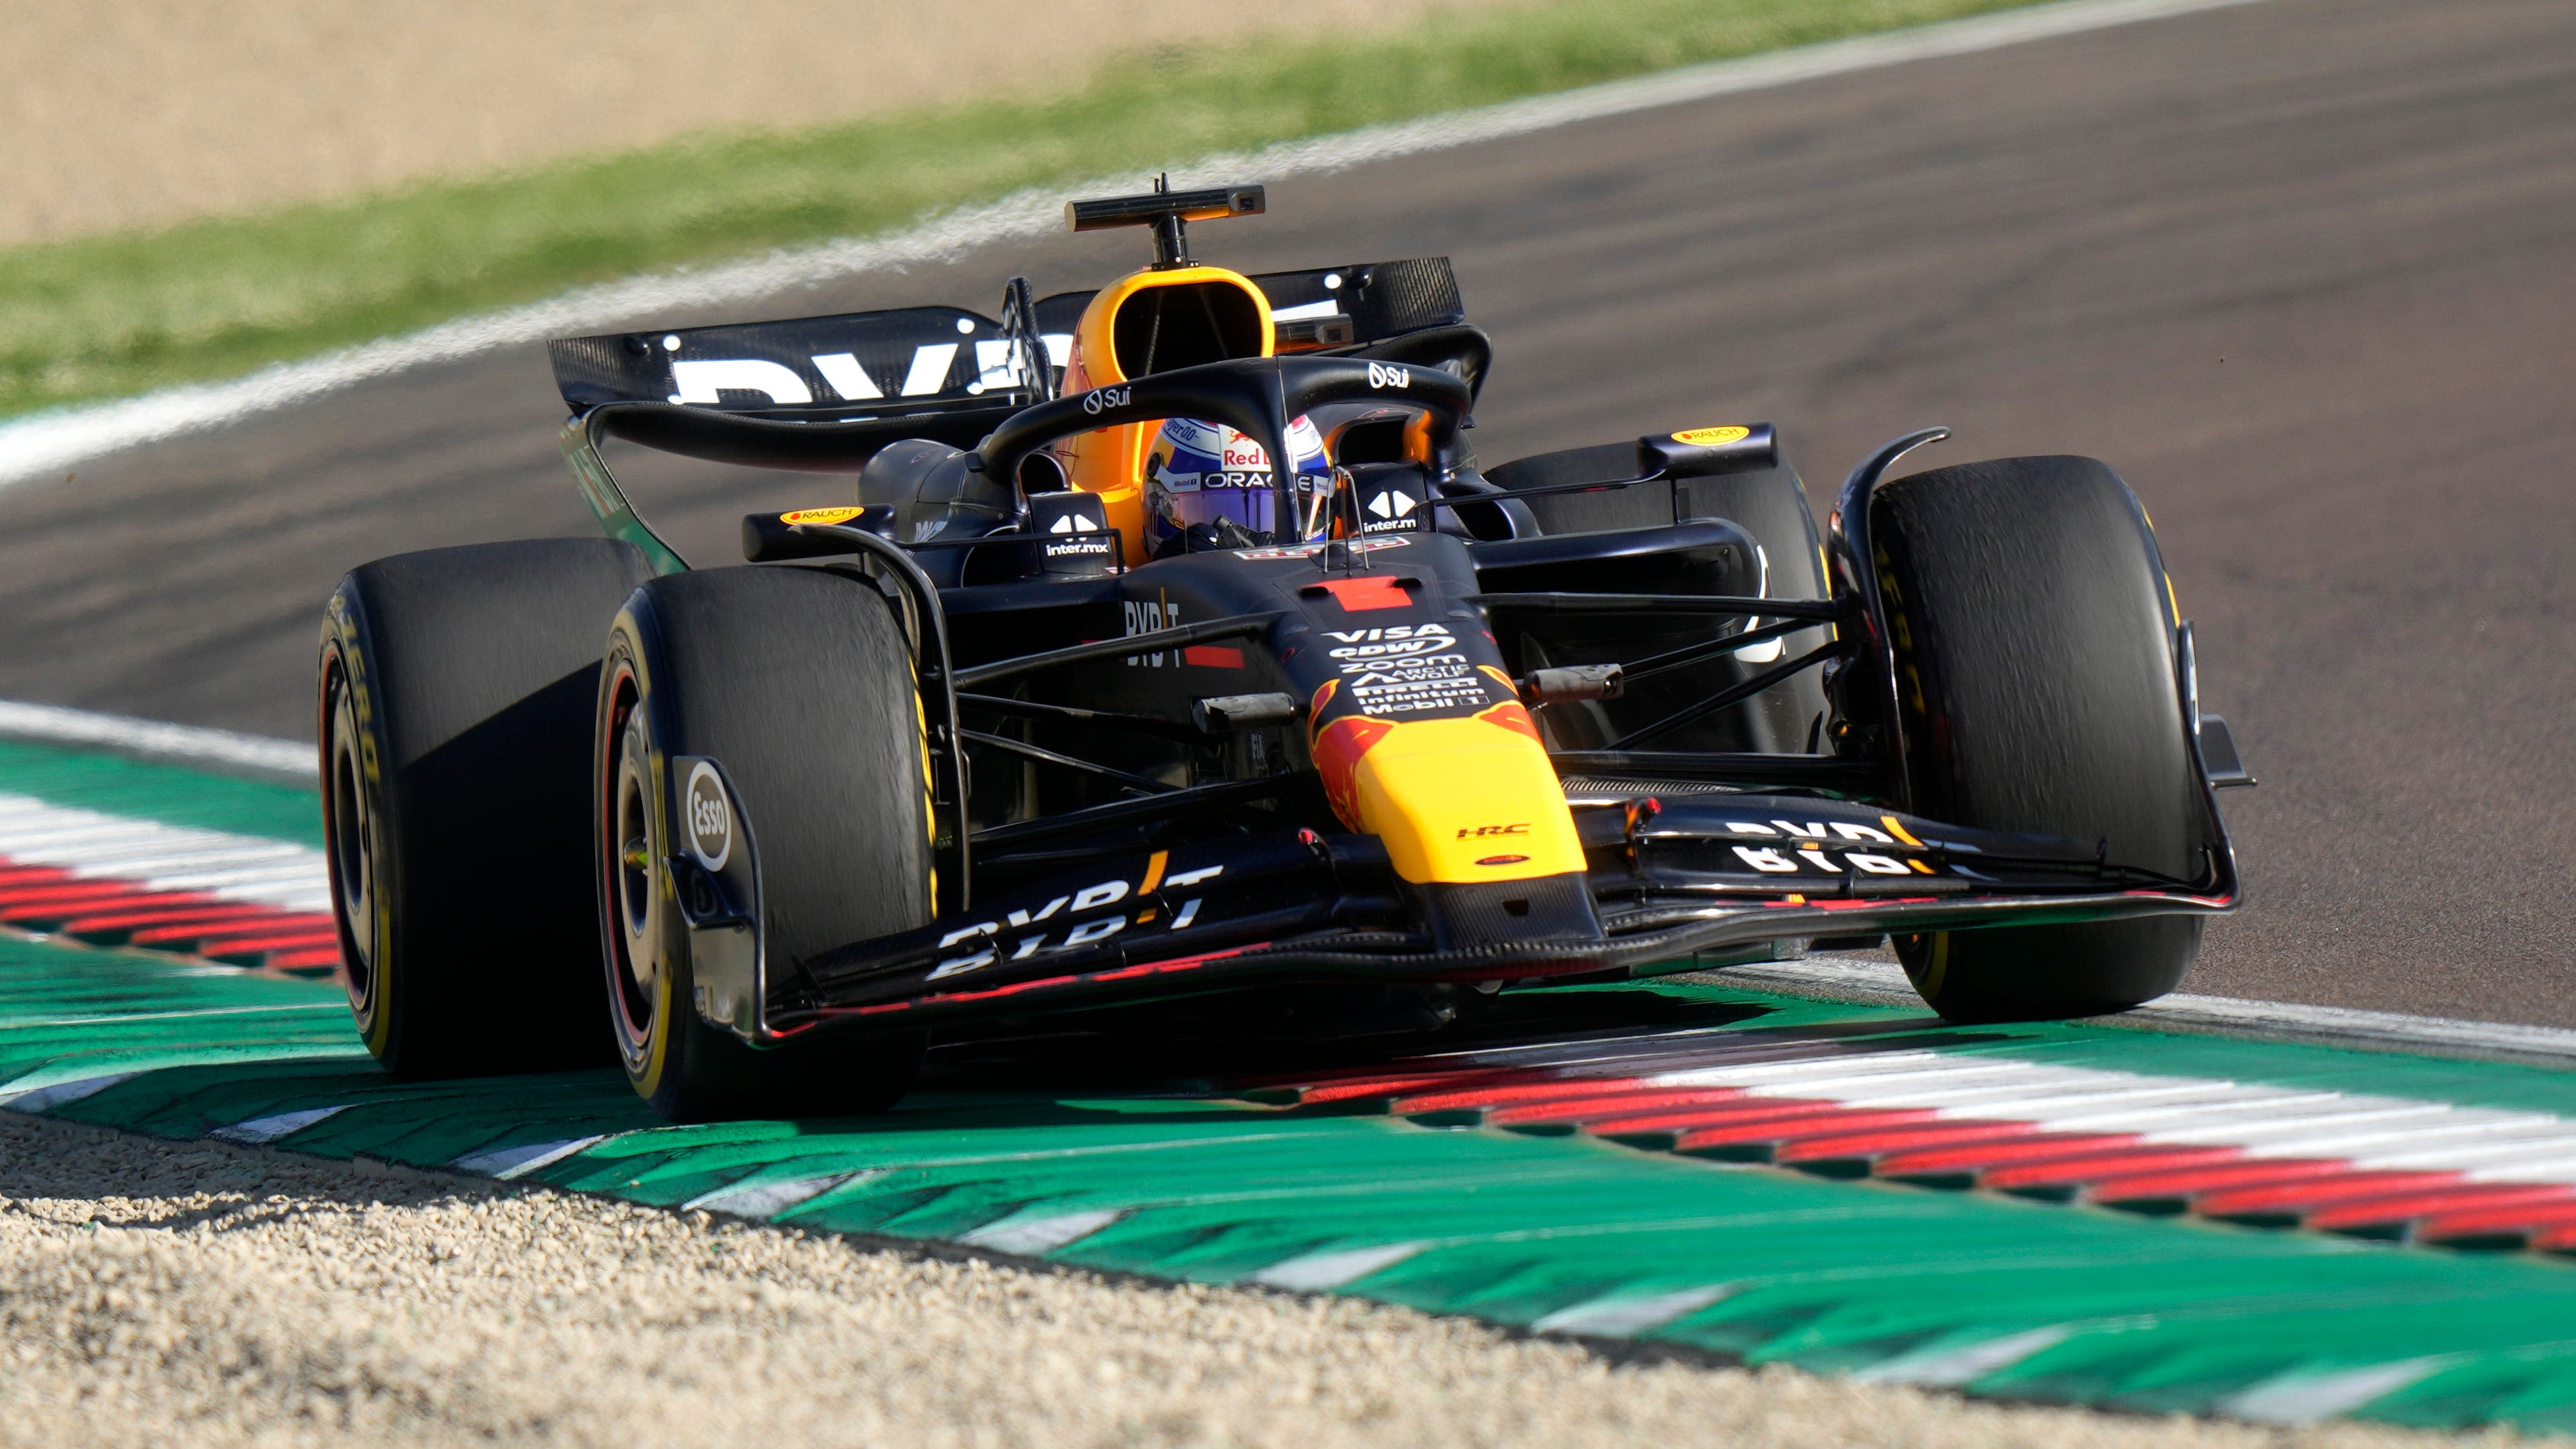 Max Verstappen angrily reacts to being obstructed by Lewis Hamilton at Imola